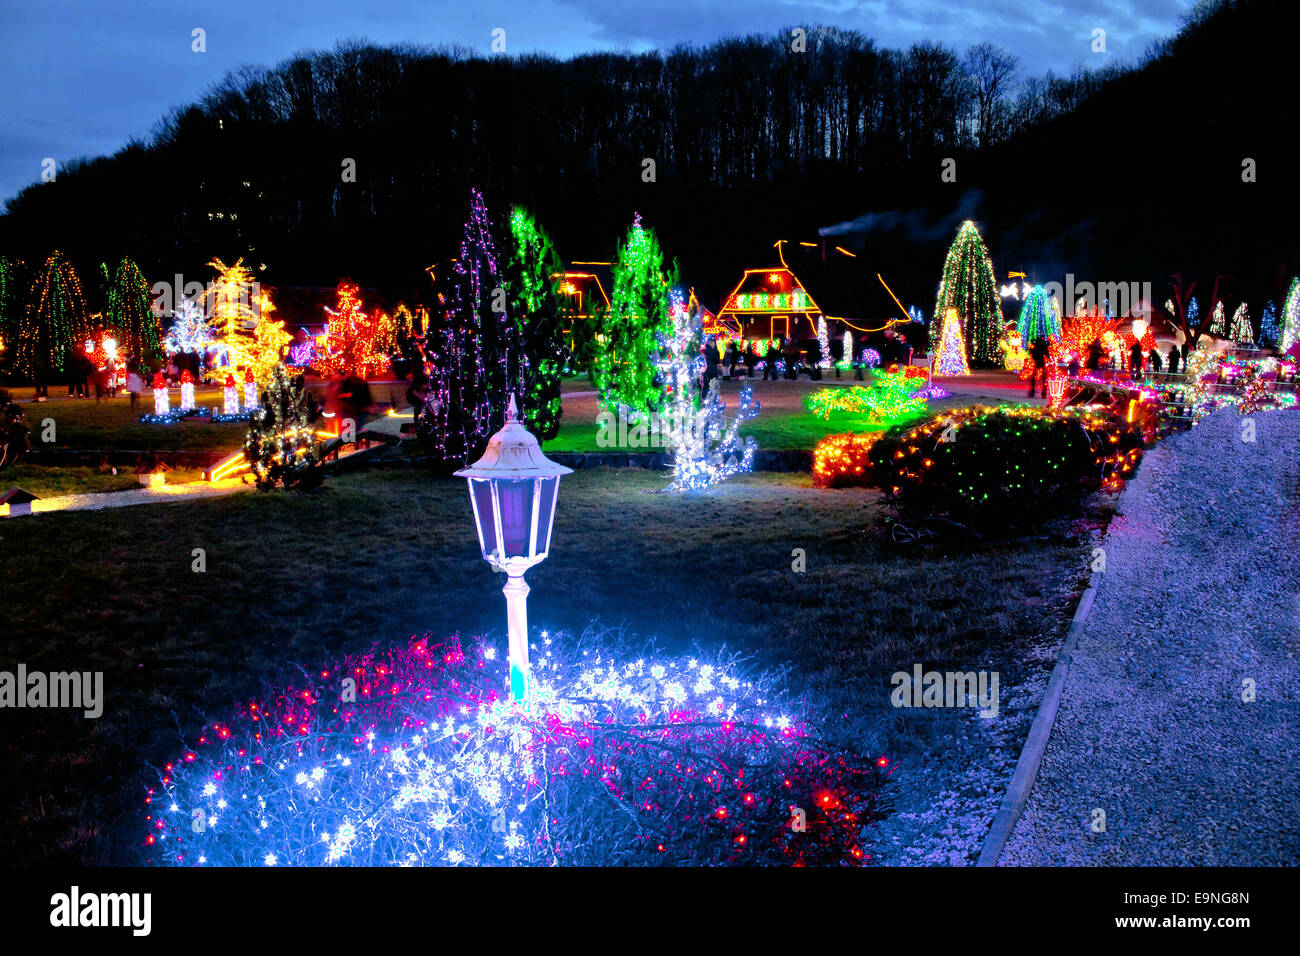 Village in colorful Christmas lights Stock Photo